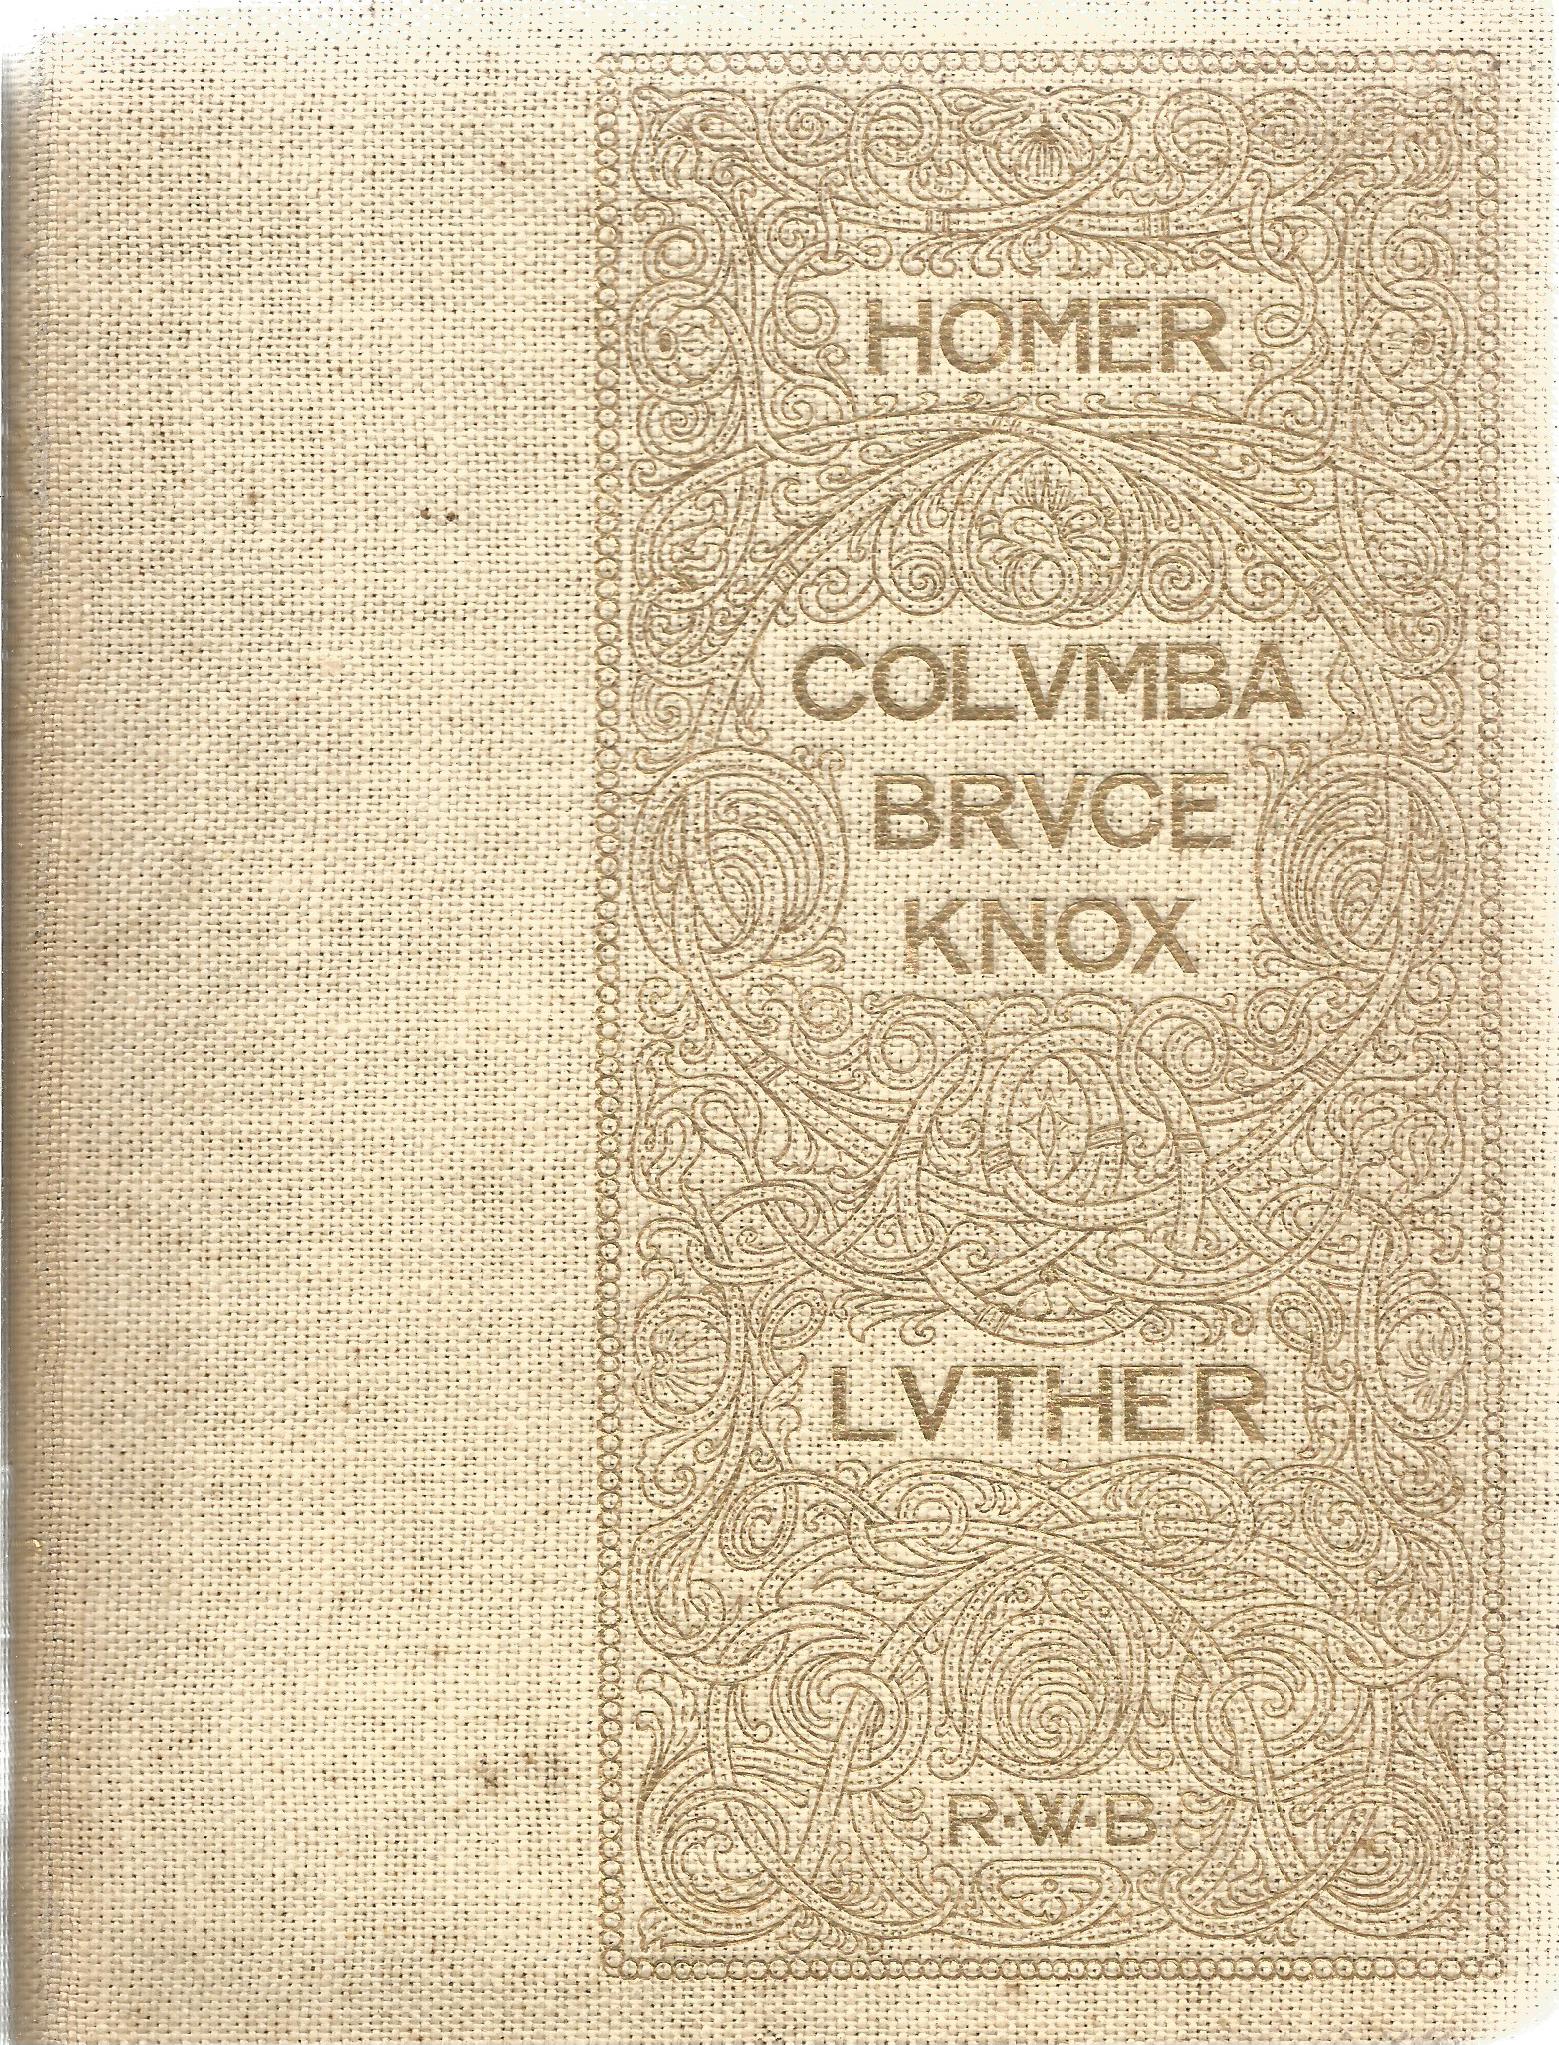 Homer and other Papers by R W Barbour 1896 Hardback Book published by The Edinburgh Press some